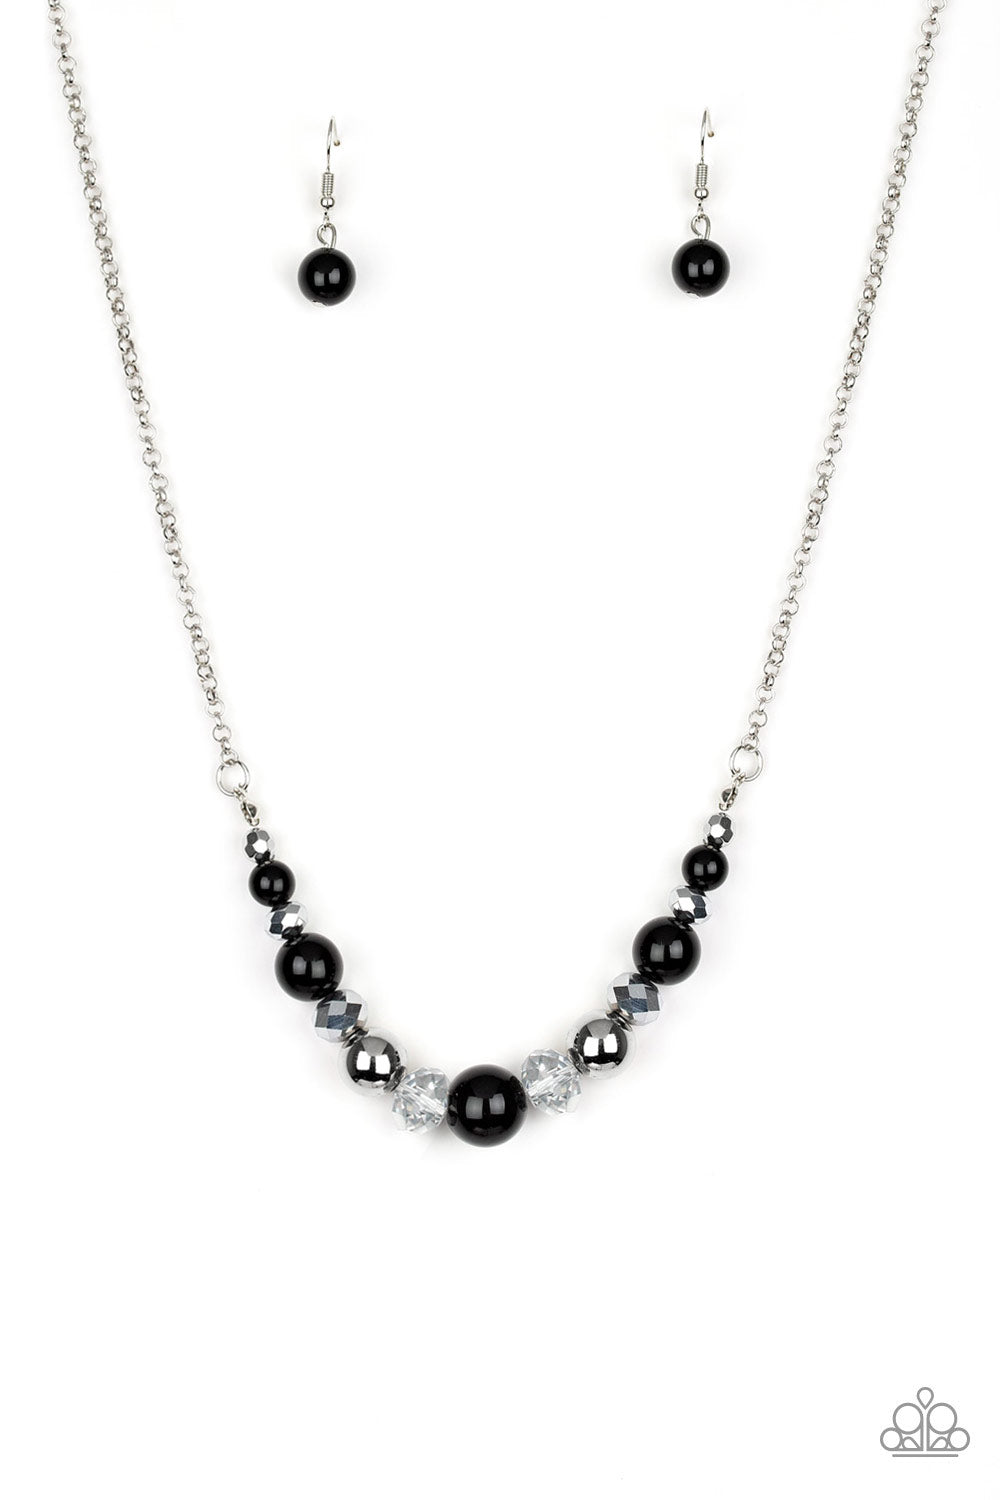 The Big Leaguer Paparazzi Accessories Necklace with Earrings